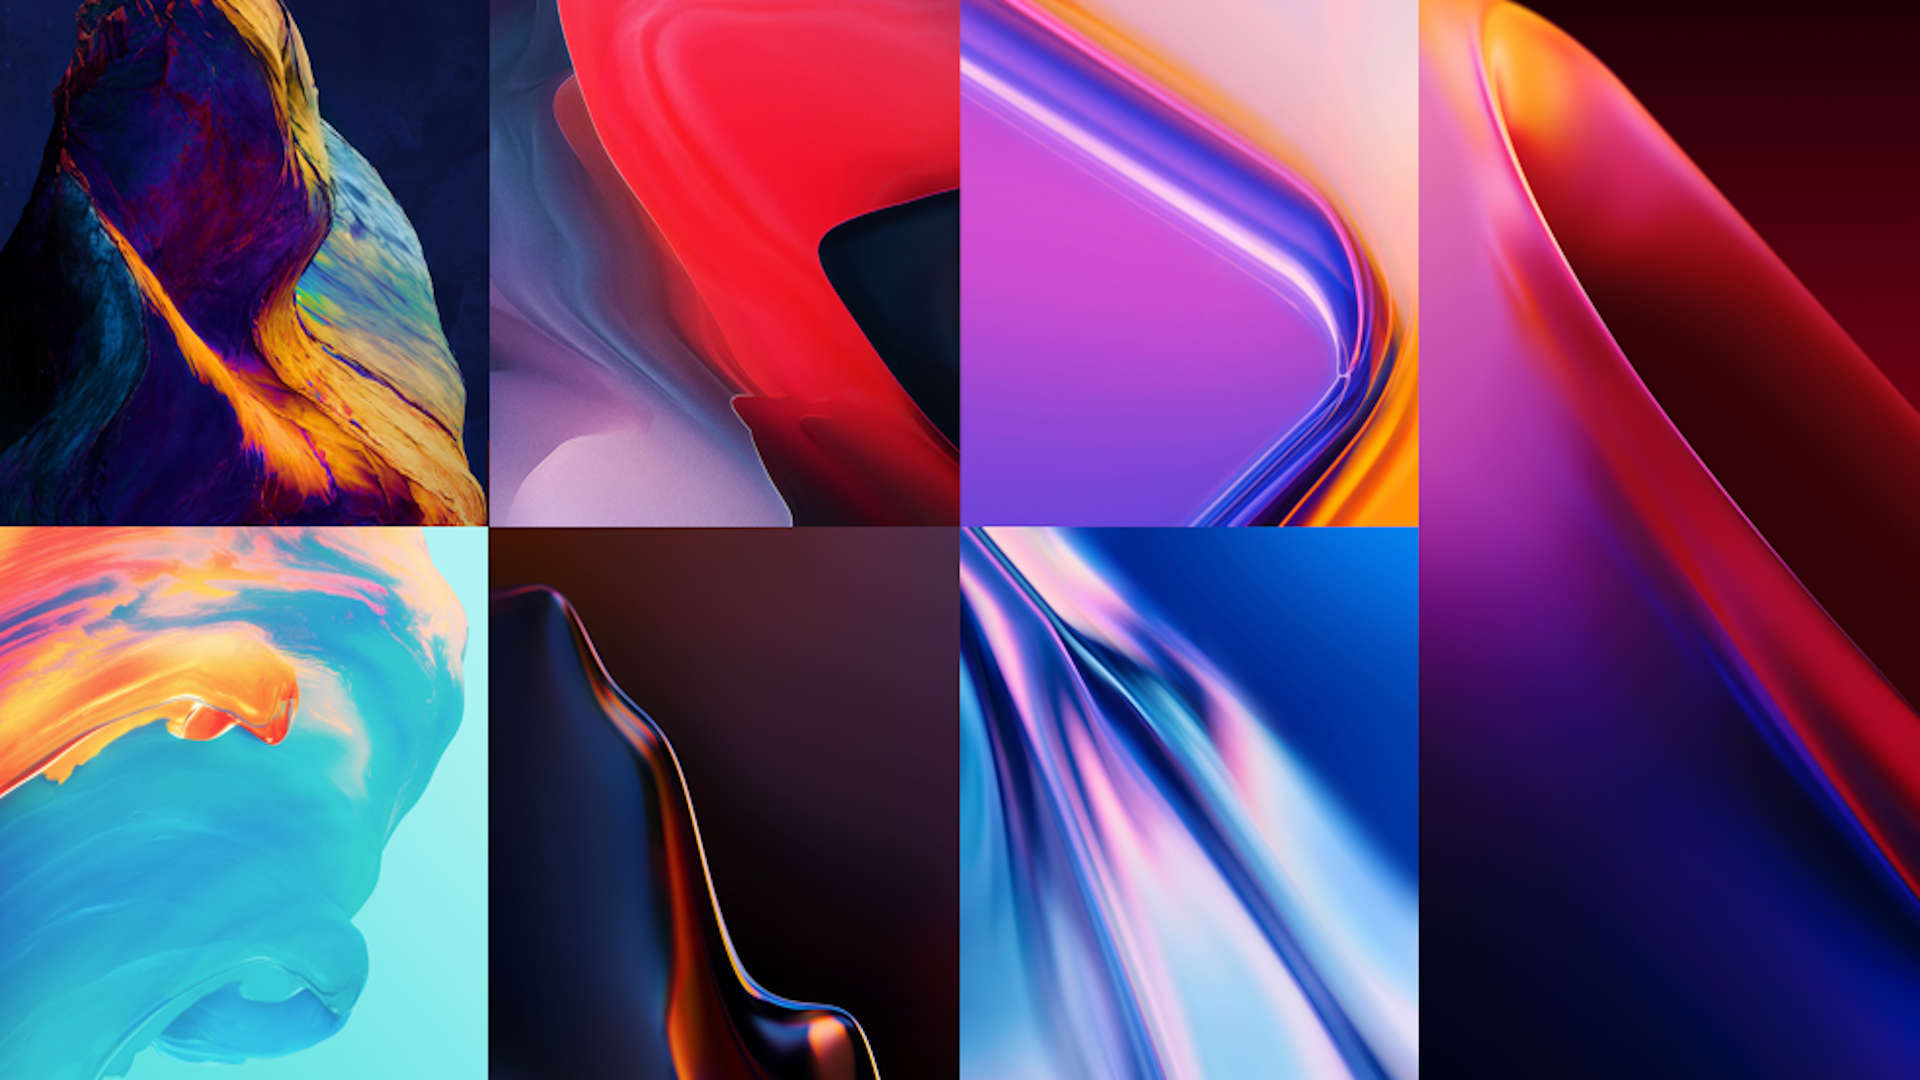 Let's retrace the history of the official OnePlus wallpapers | Download